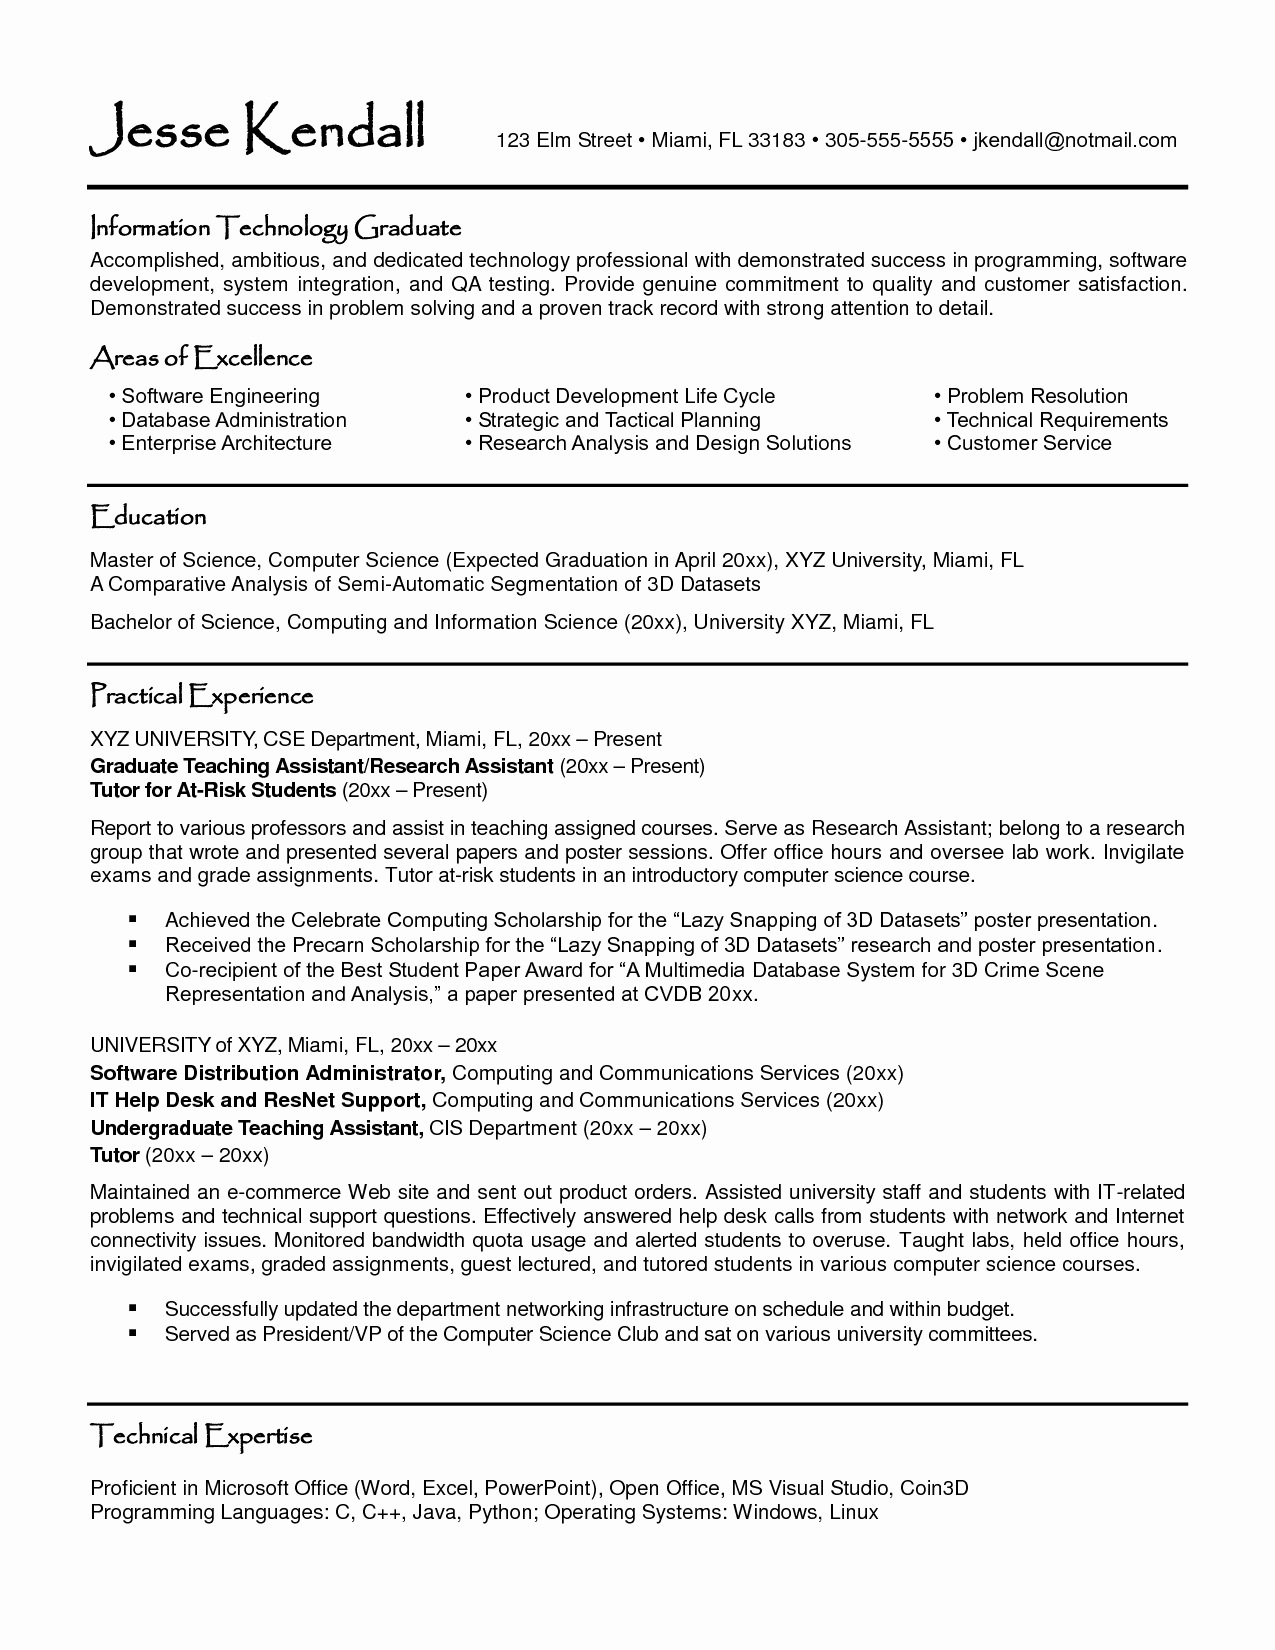 resume samples for college student beautiful pin by jobresume on resume career termplate free of resume samples for college student